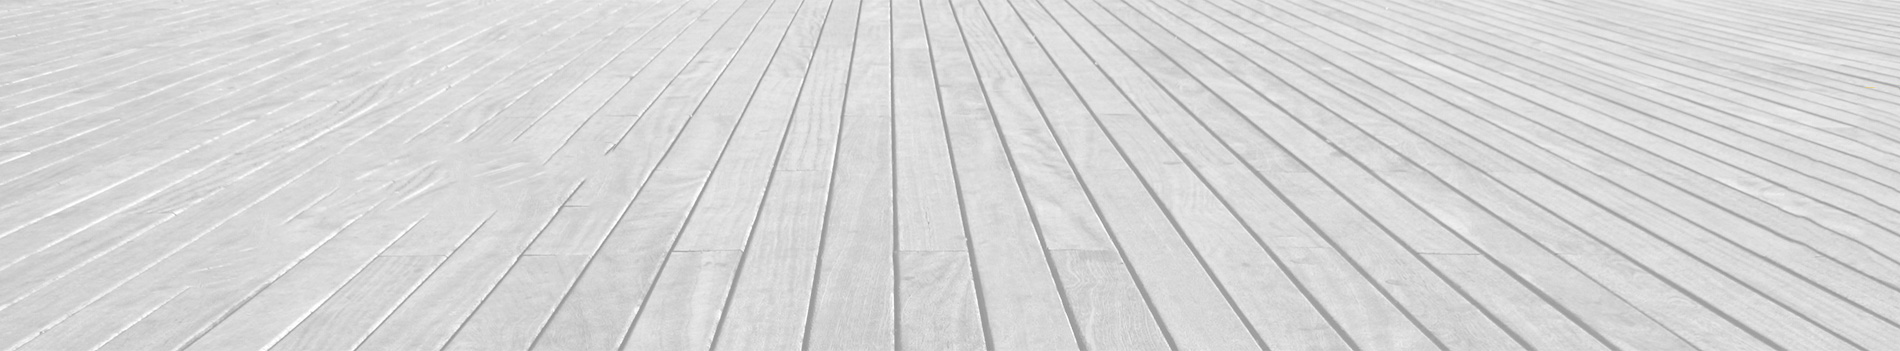 Decks - Deck and Shed Pros